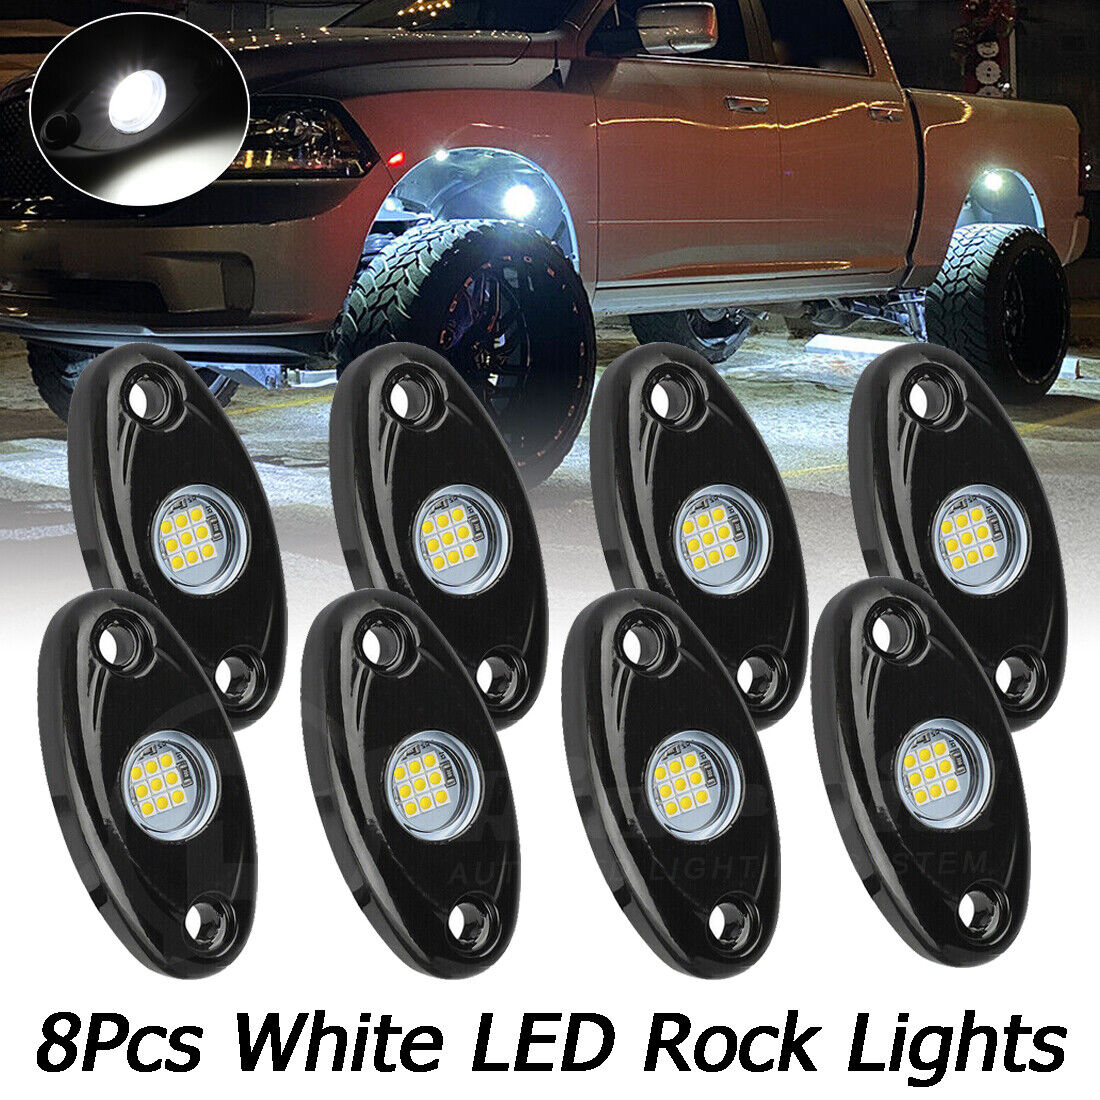 8X White LED Rock Lights Underbody Trail Rig Glow Lamp Offroad SUV Pickup Truck